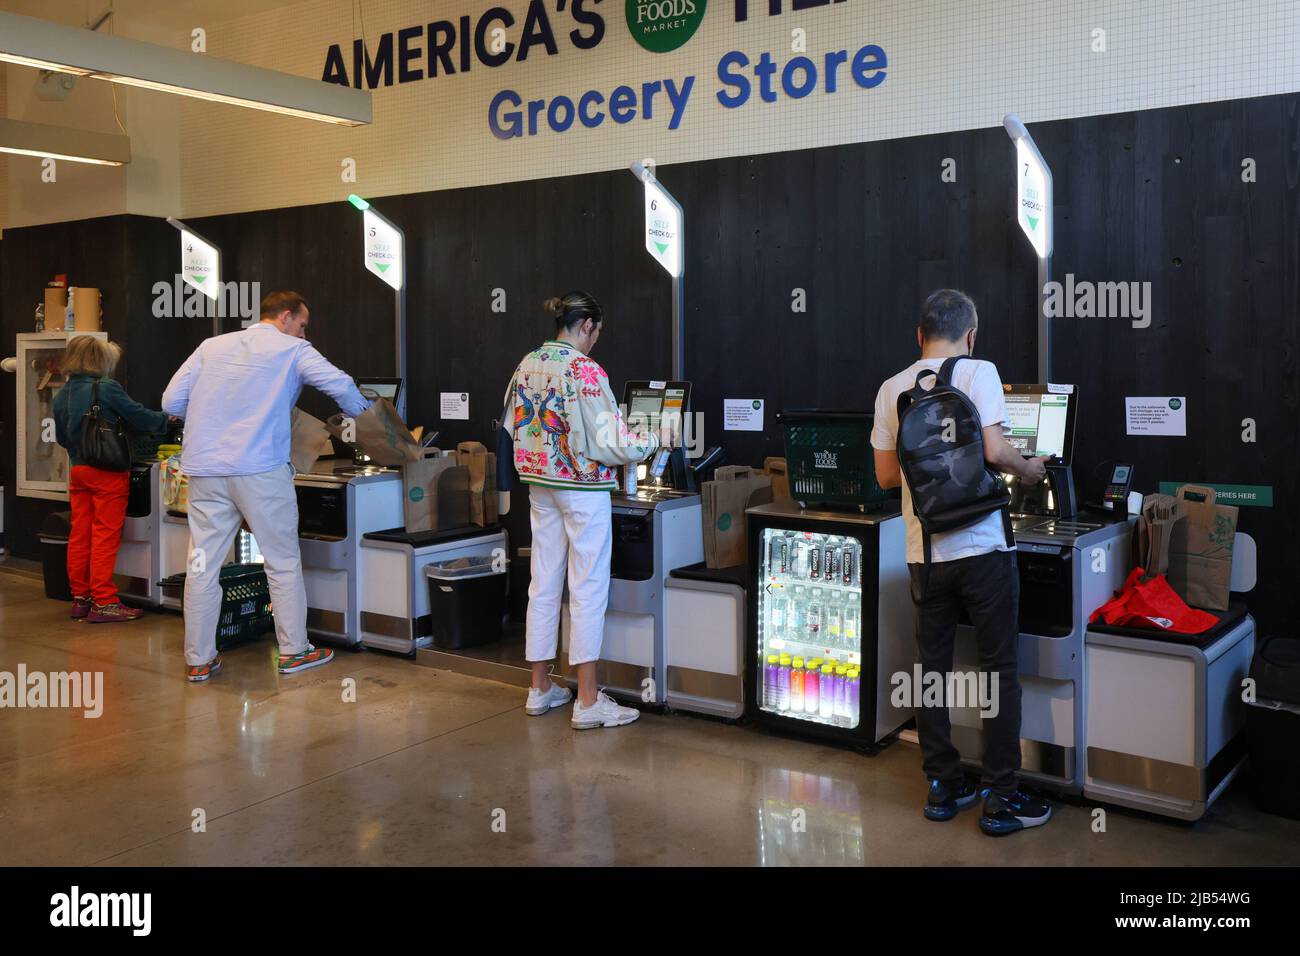 People scanning and bagging items at a self scan checkout kiosk in a supermarket. Grocery store automated retail machine in New York Stock Photo